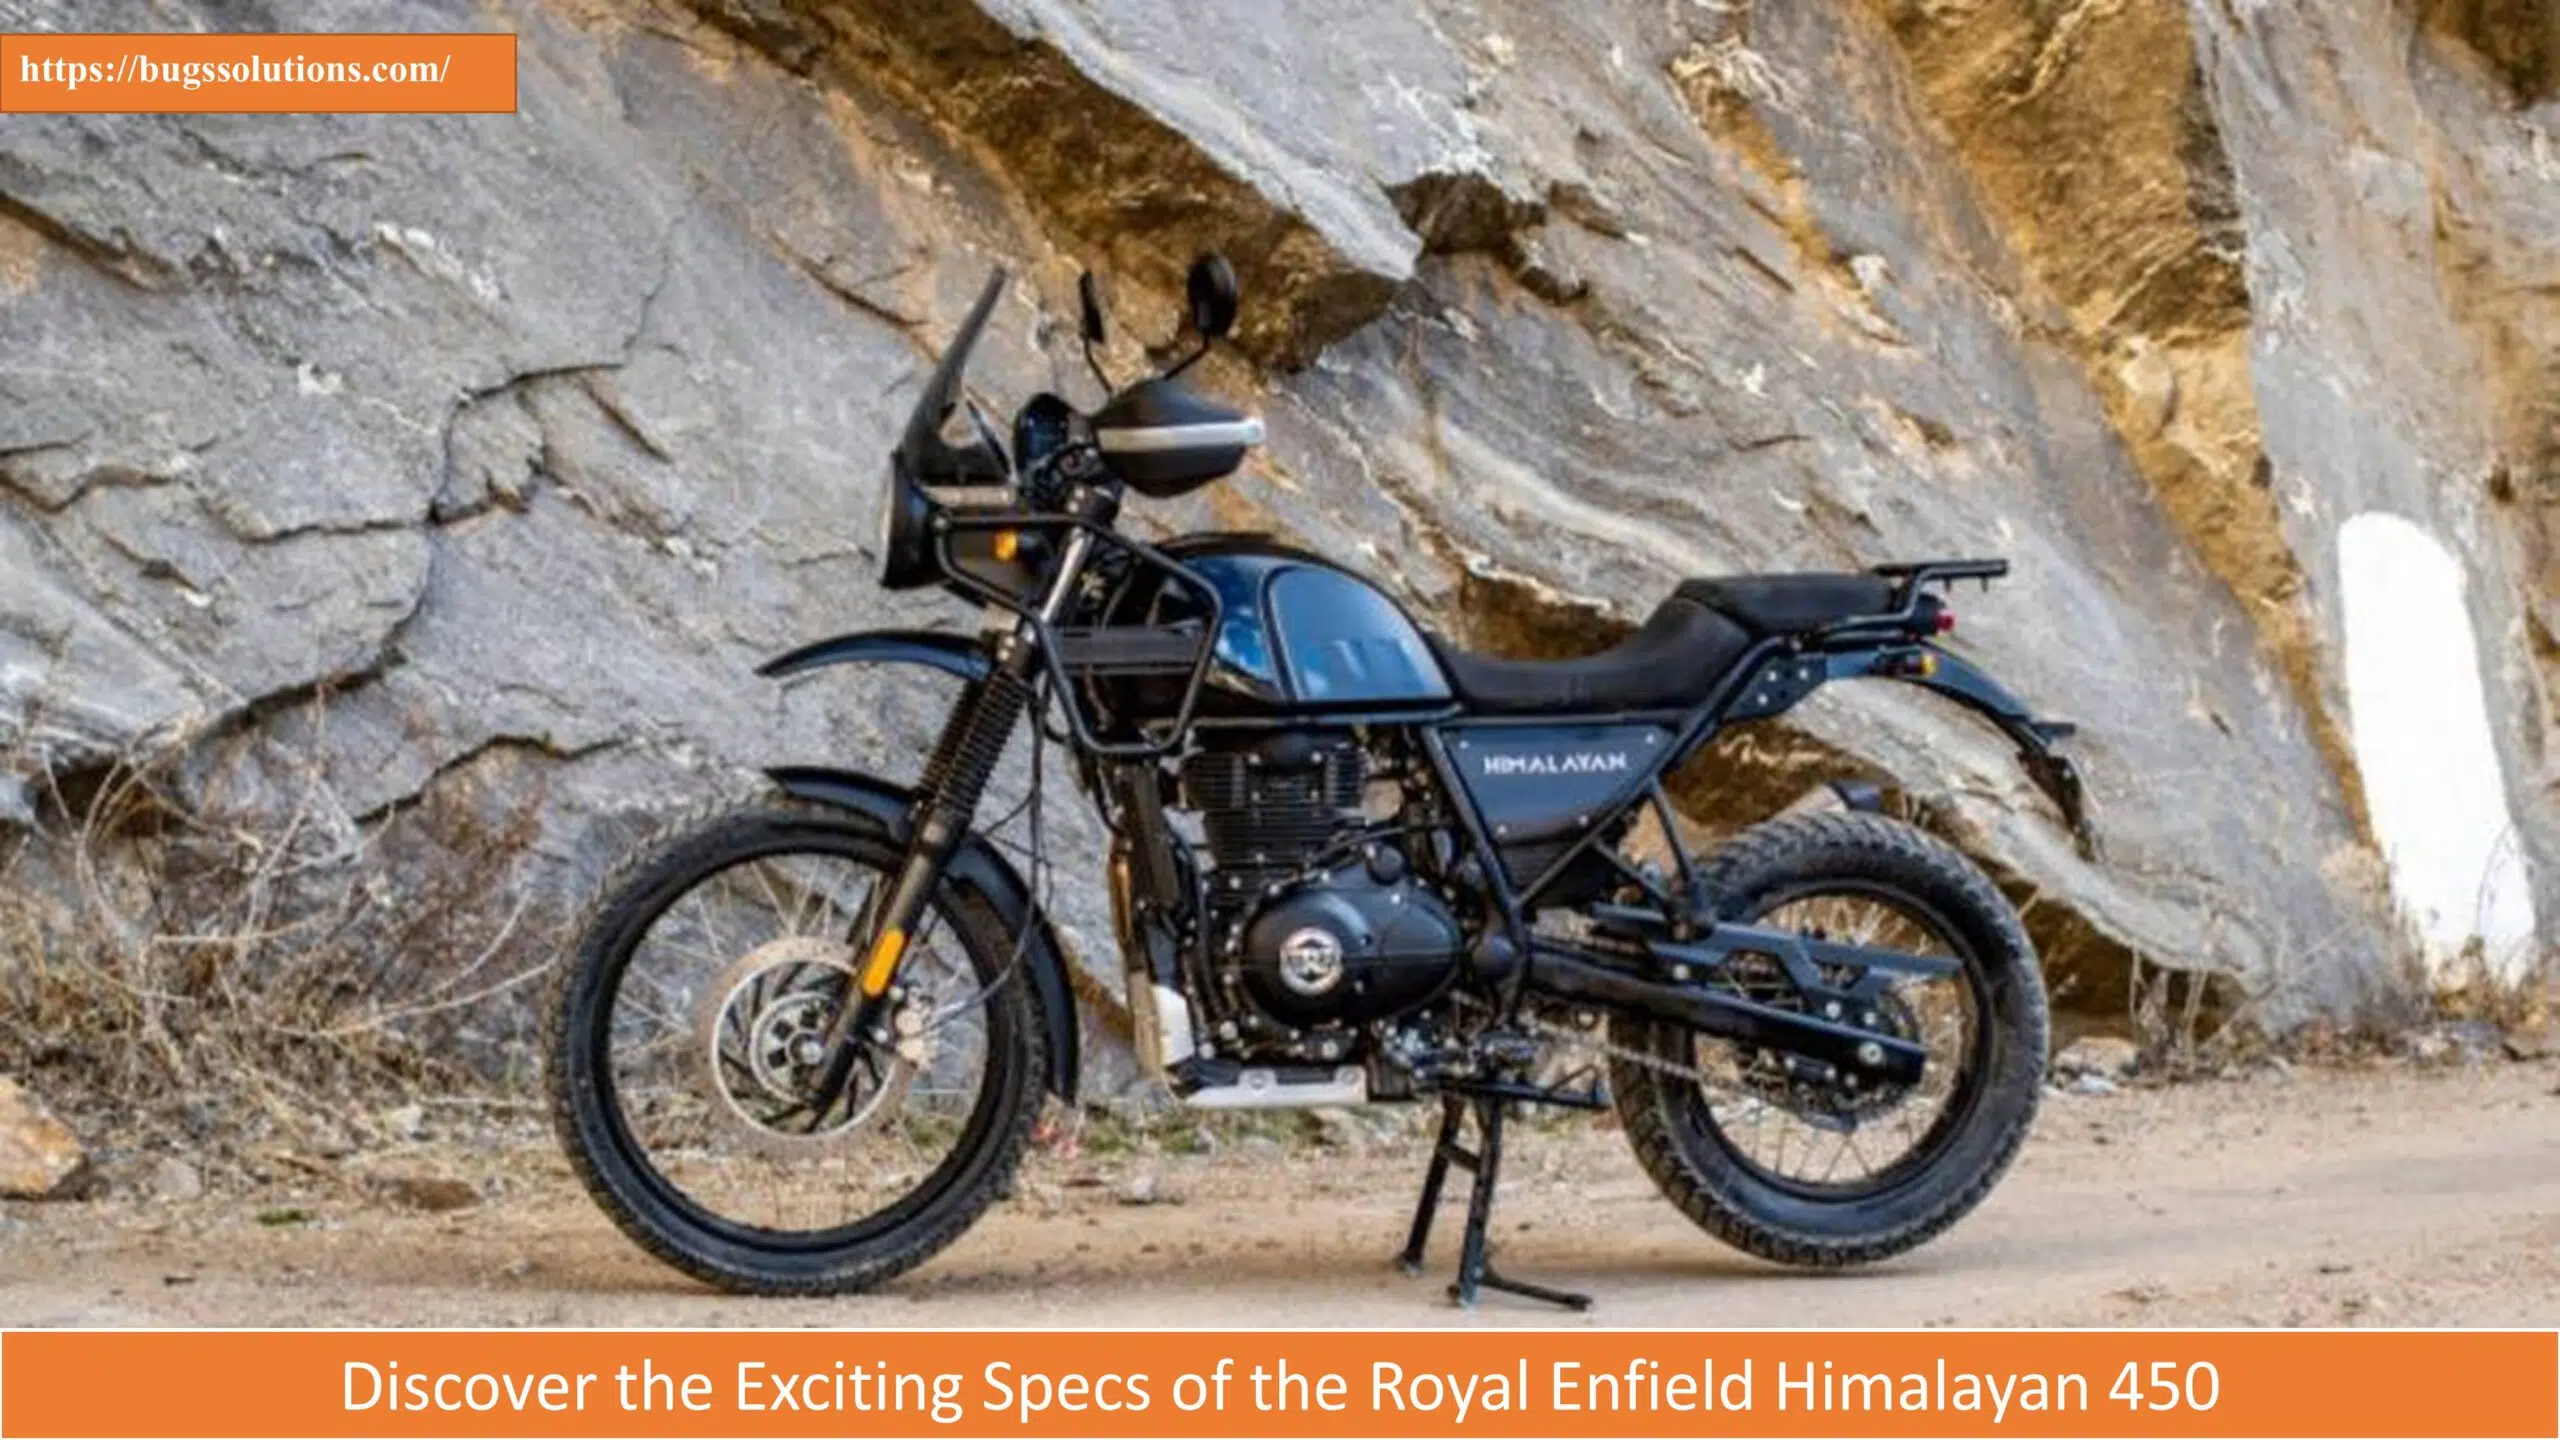 Discover the Exciting Specs of the Royal Enfield Himalayan 450